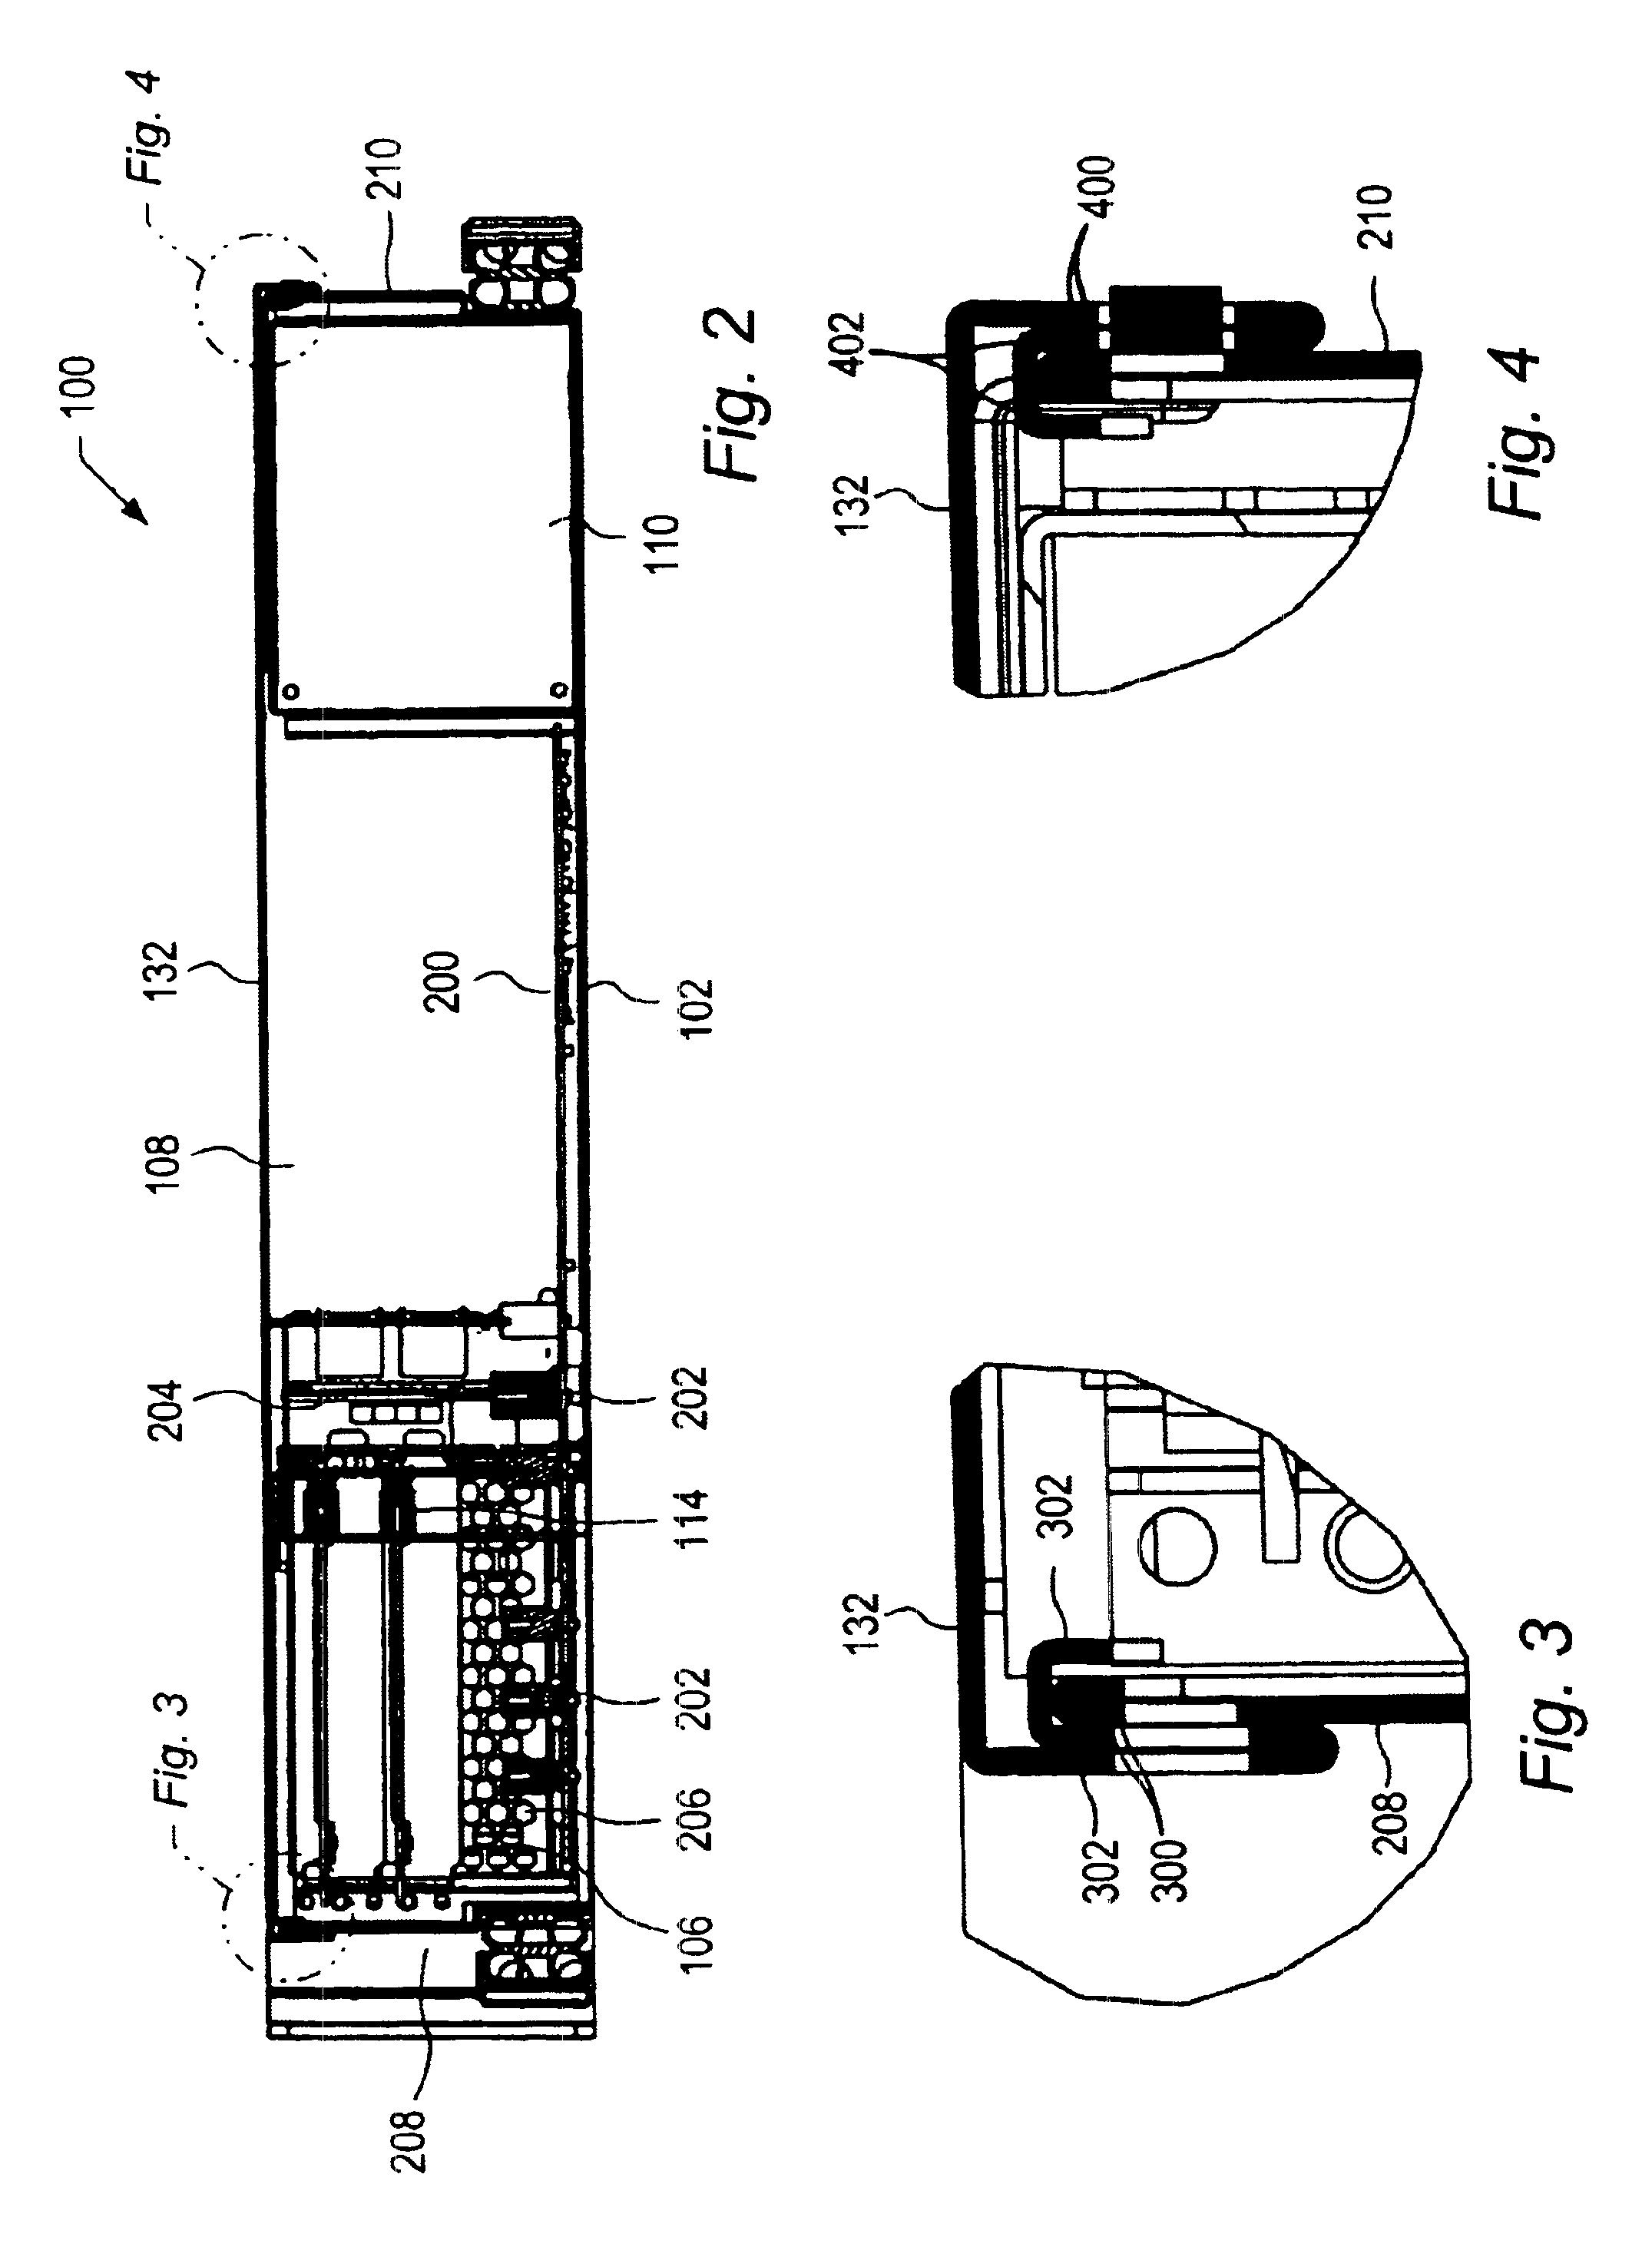 Apparatus for containing electro-magnetic interference